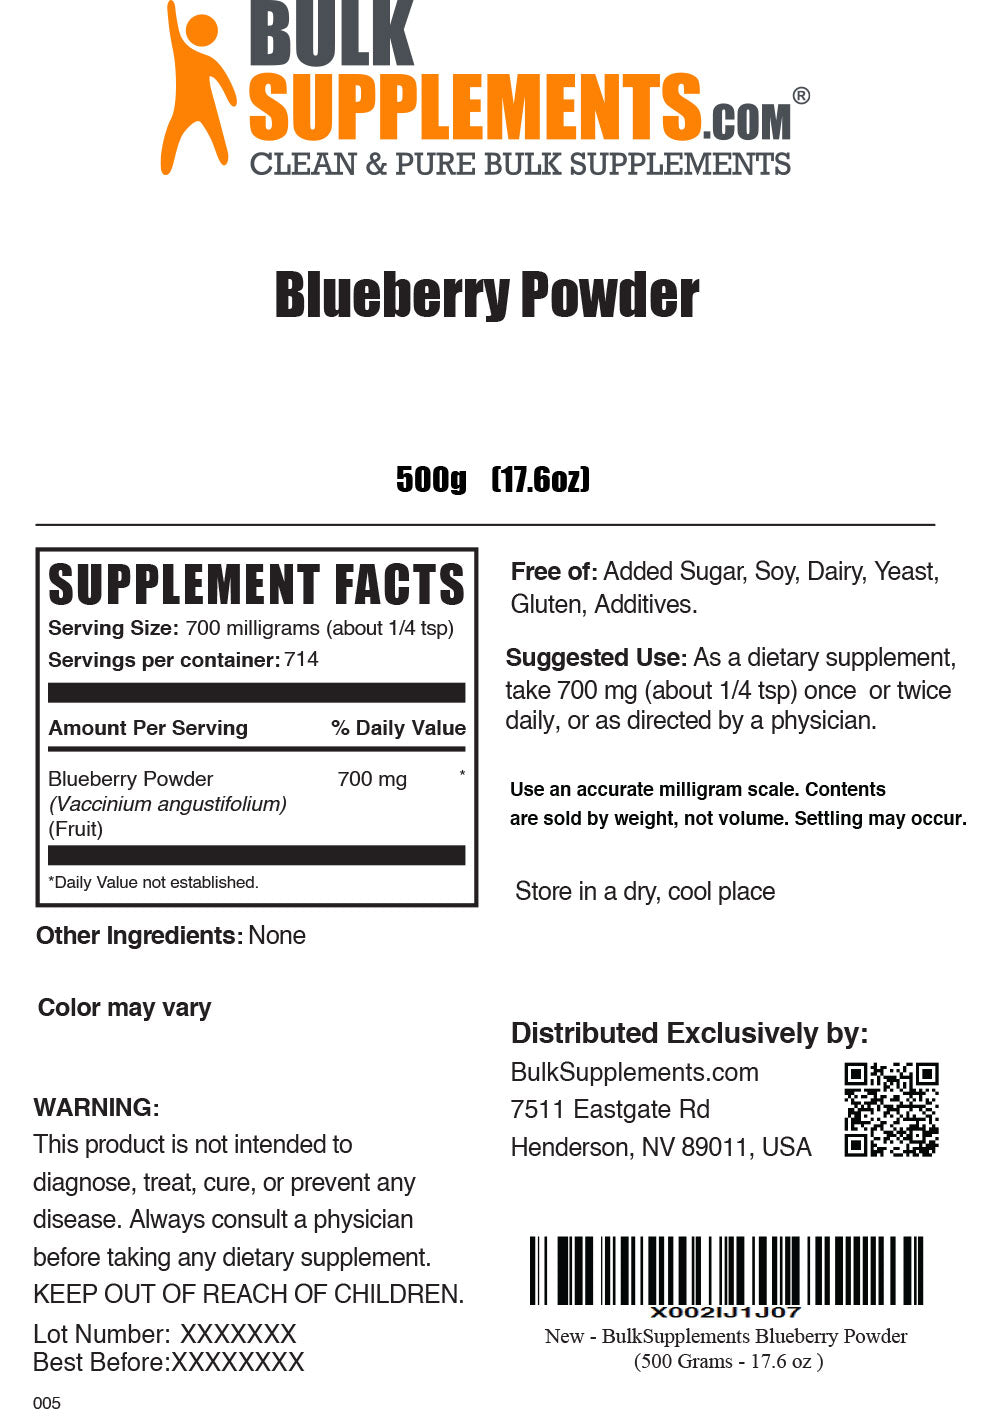 500g of Blueberry Powder Supplement Facts